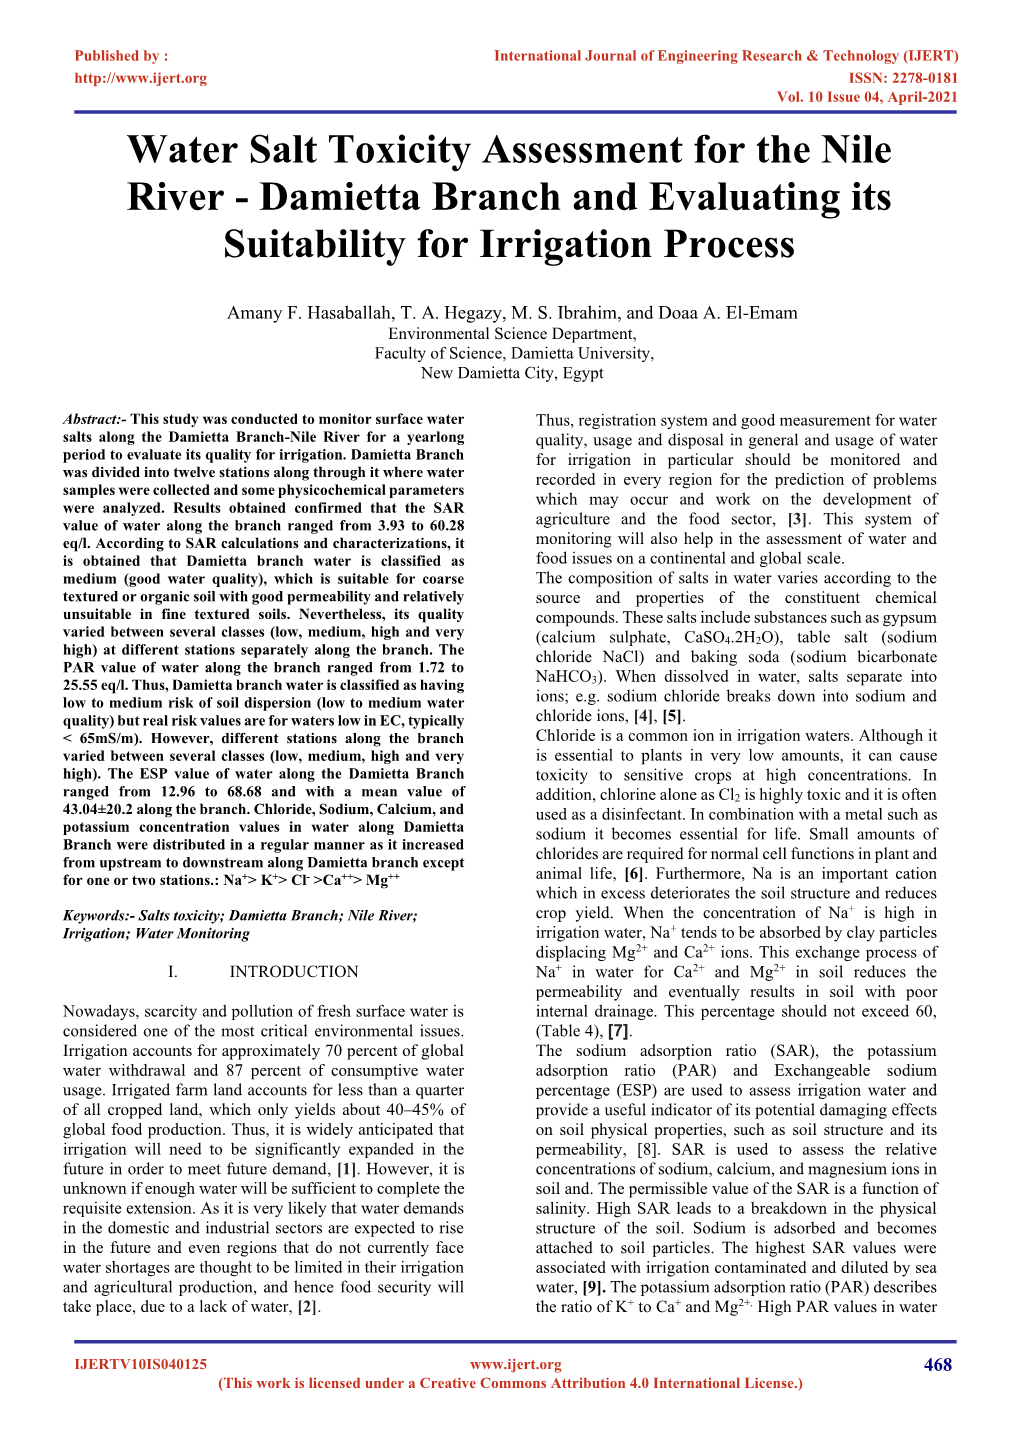 Water Salt Toxicity Assessment for the Nile River - Damietta Branch and Evaluating Its Suitability for Irrigation Process